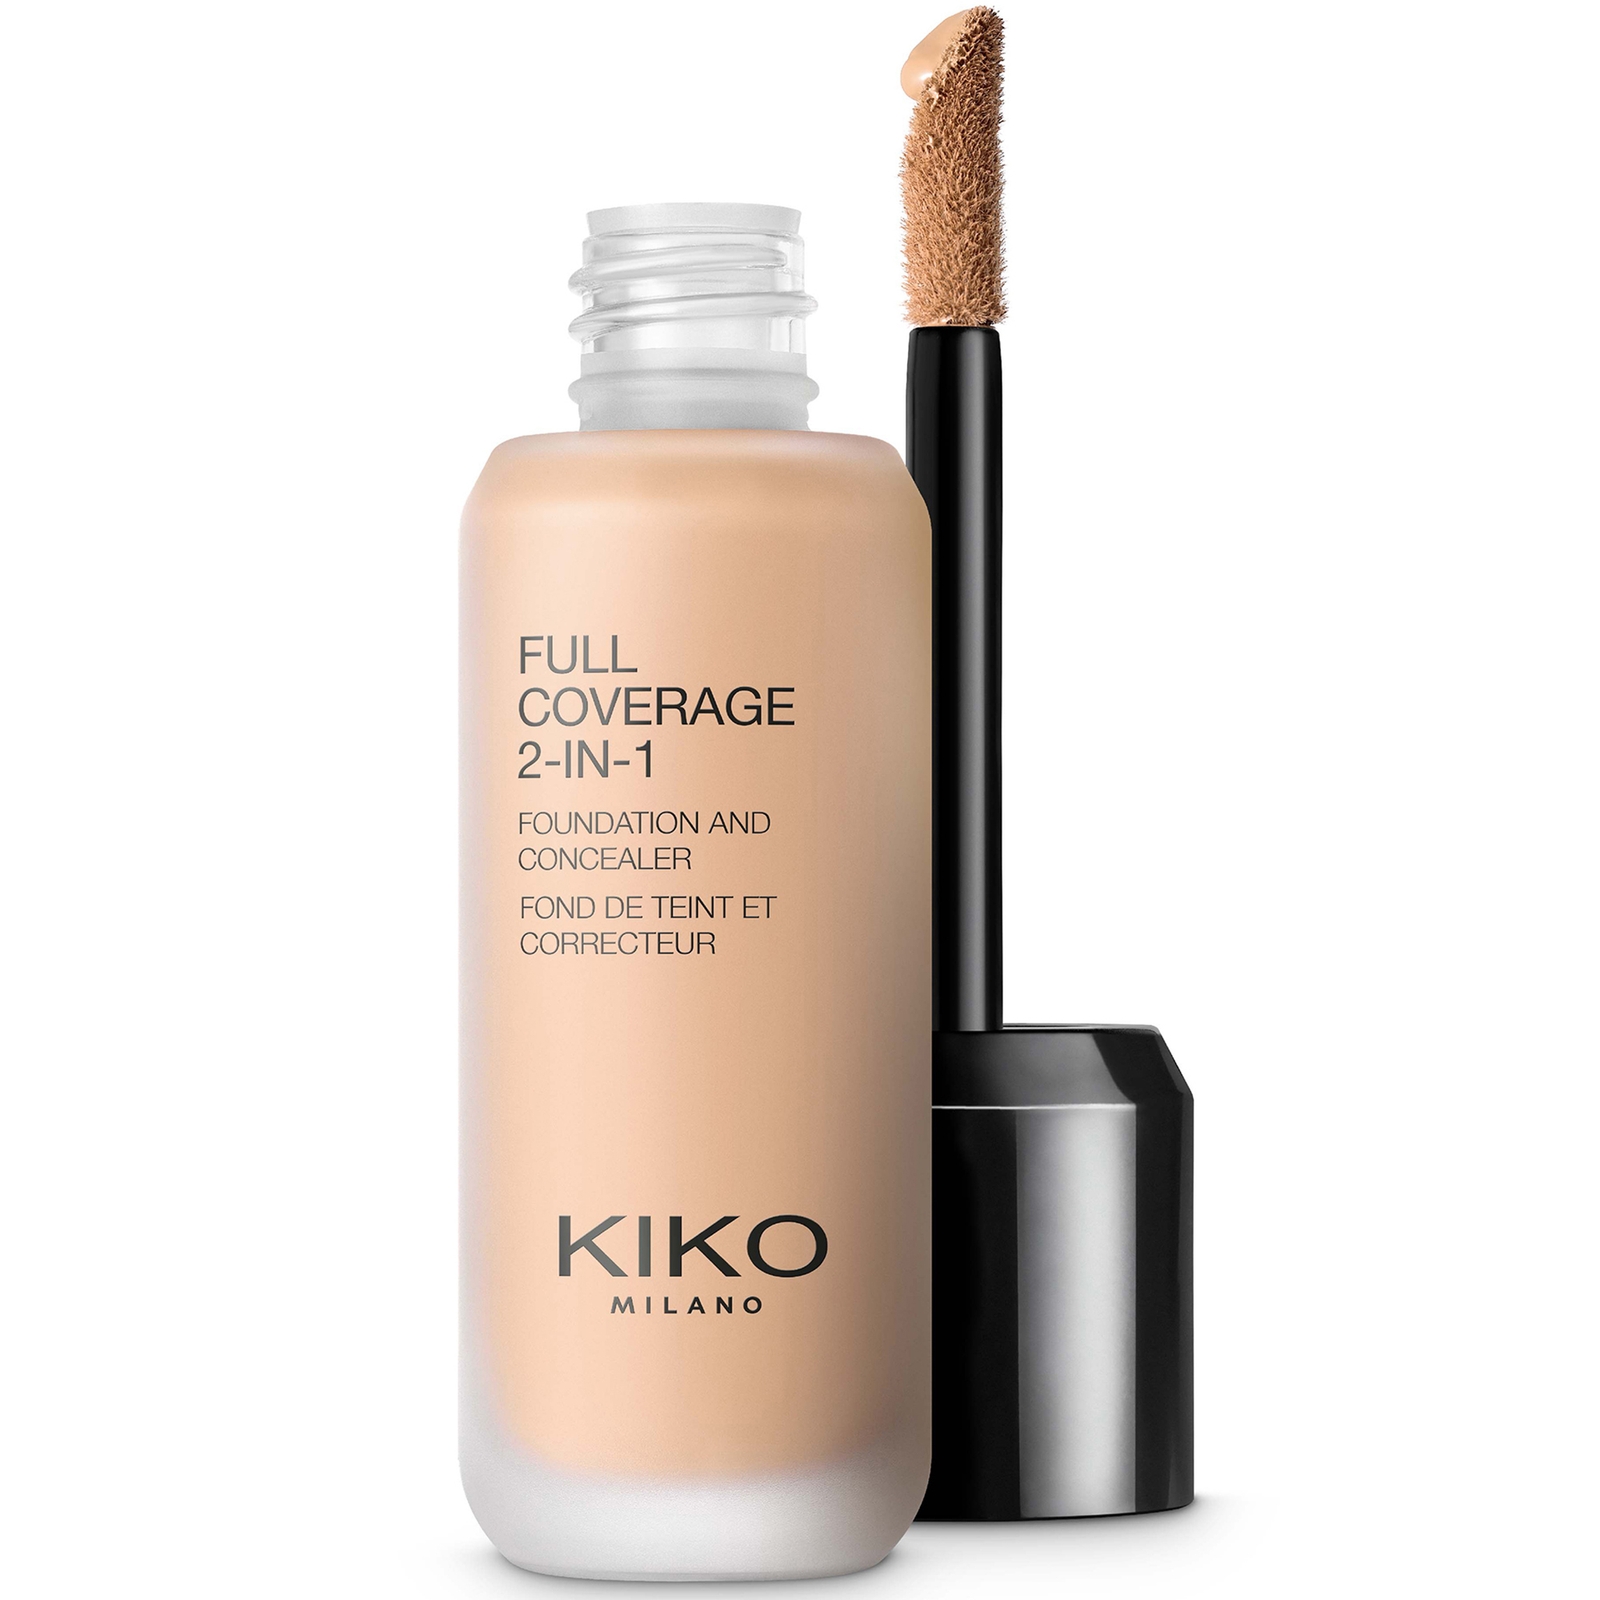 KIKO Milano Full Coverage 2-in-1 Foundation and Concealer 25ml (Various Shades) - 30 Warm Beige